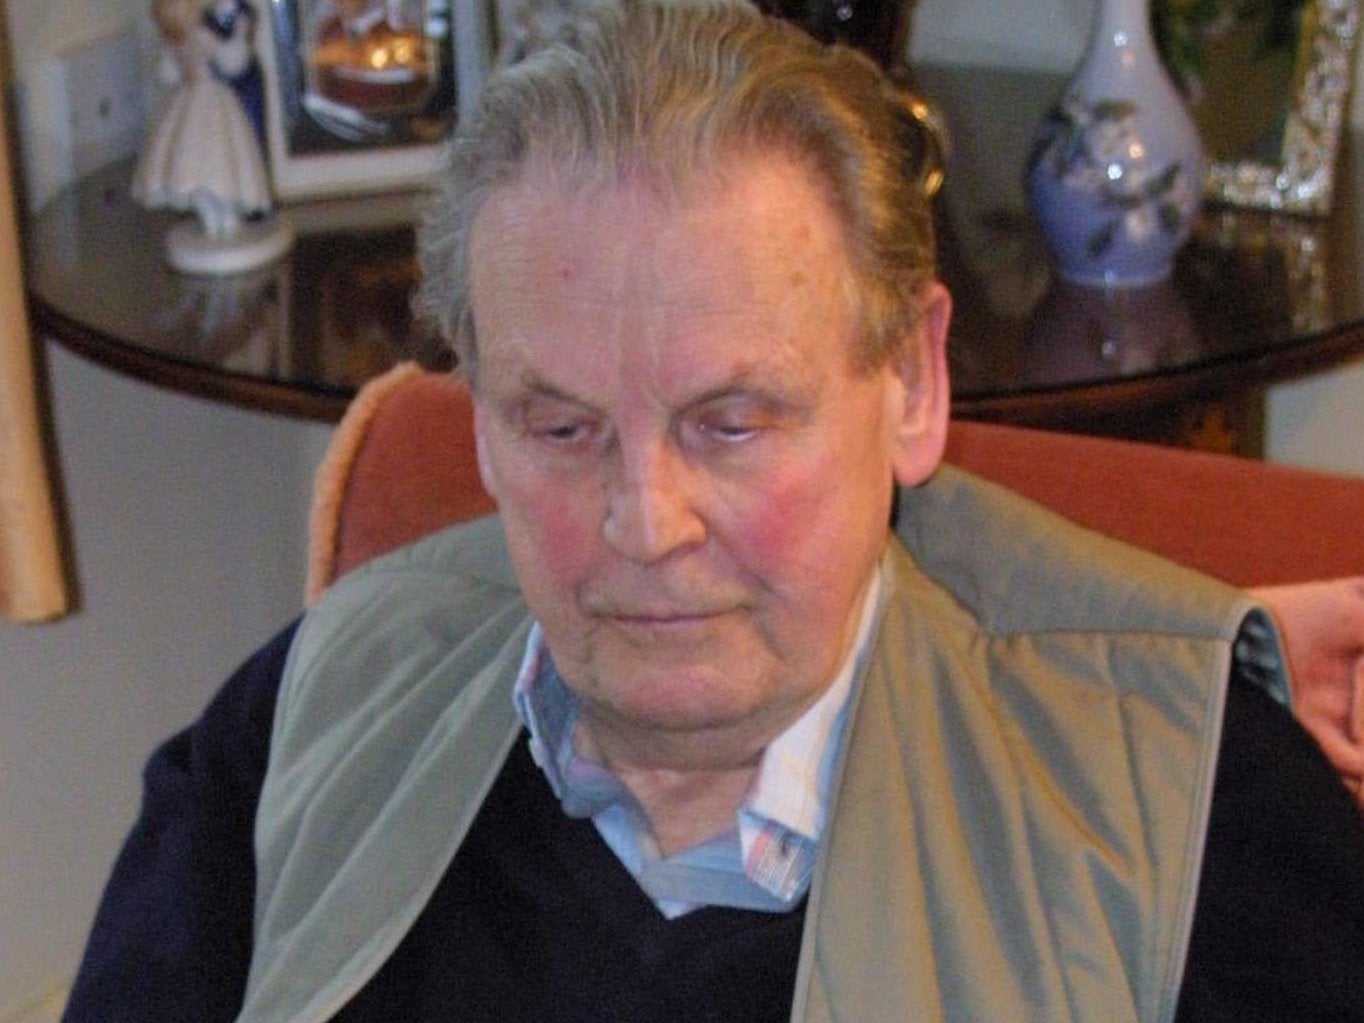 Former squadron leader Dick Churchill previously said he thought sharing his surname with the wartime prime minister Winston Churchill kept him alive.